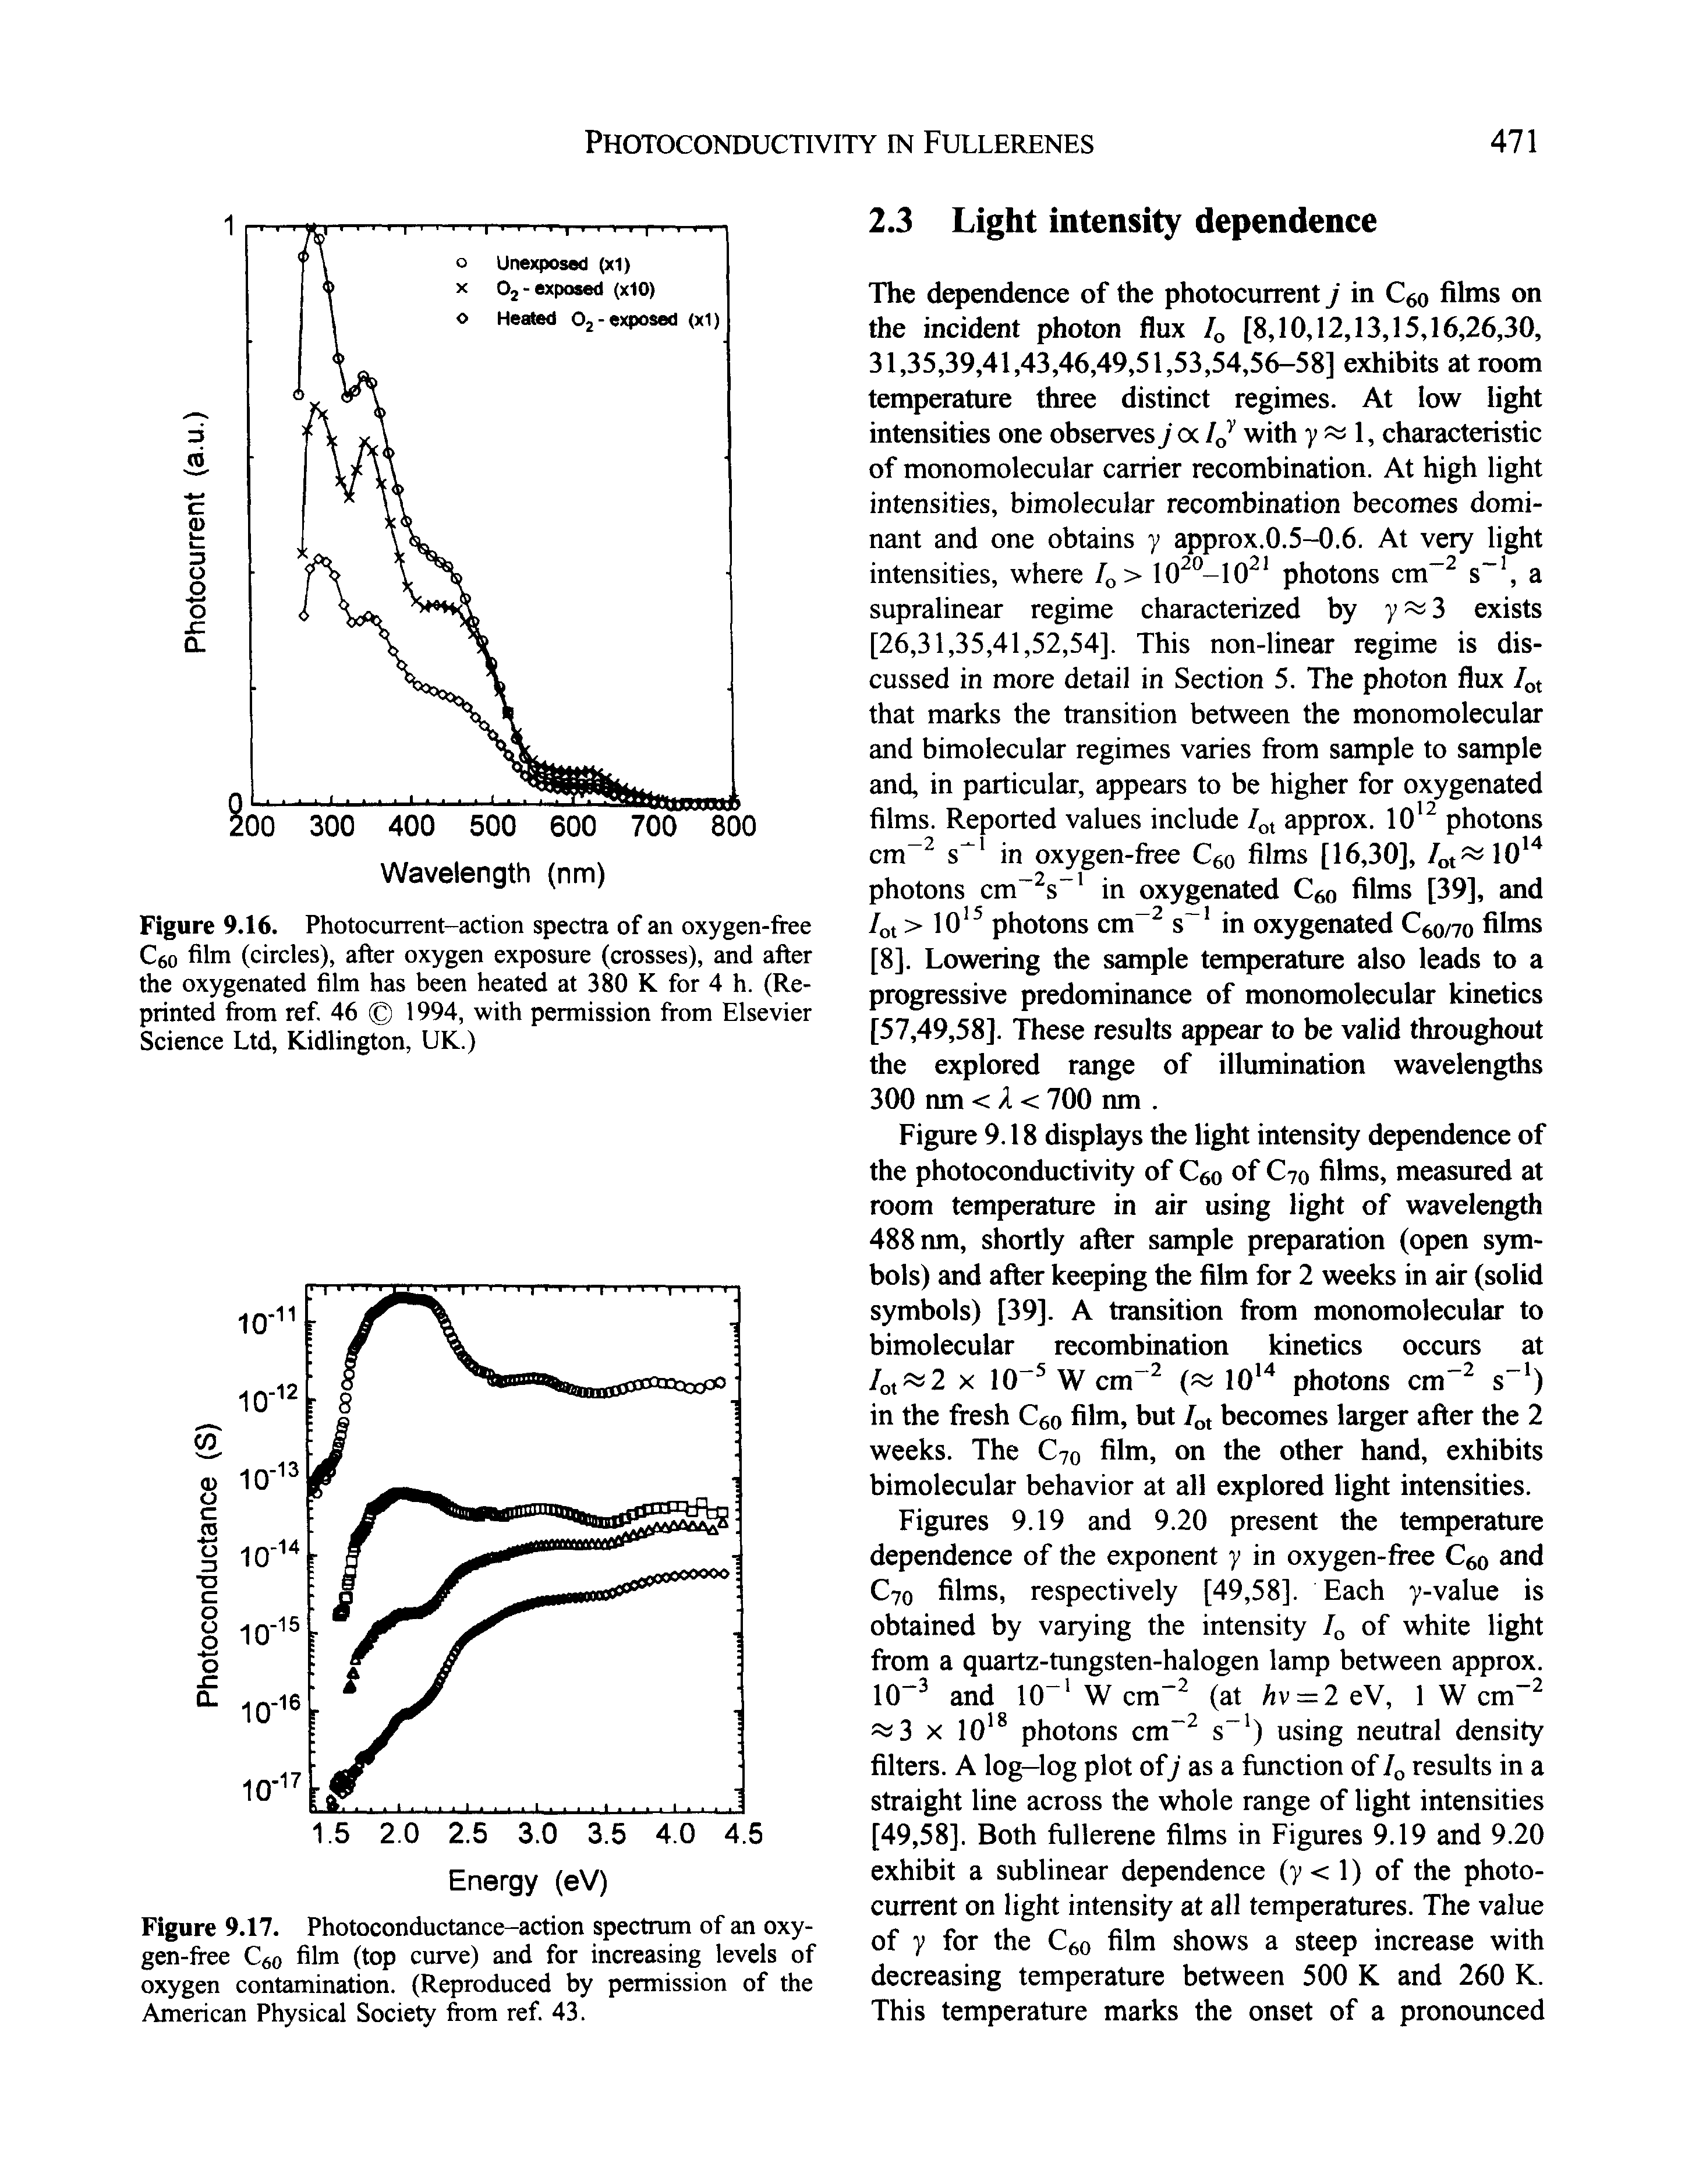 Figure 9.17. Photoconductance-action spectrum of an oxygen-free Cao film (top curve) and for increasing levels of oxygen contamination. (Reproduced by permission of the Ainerican Physical Society from ref 43.